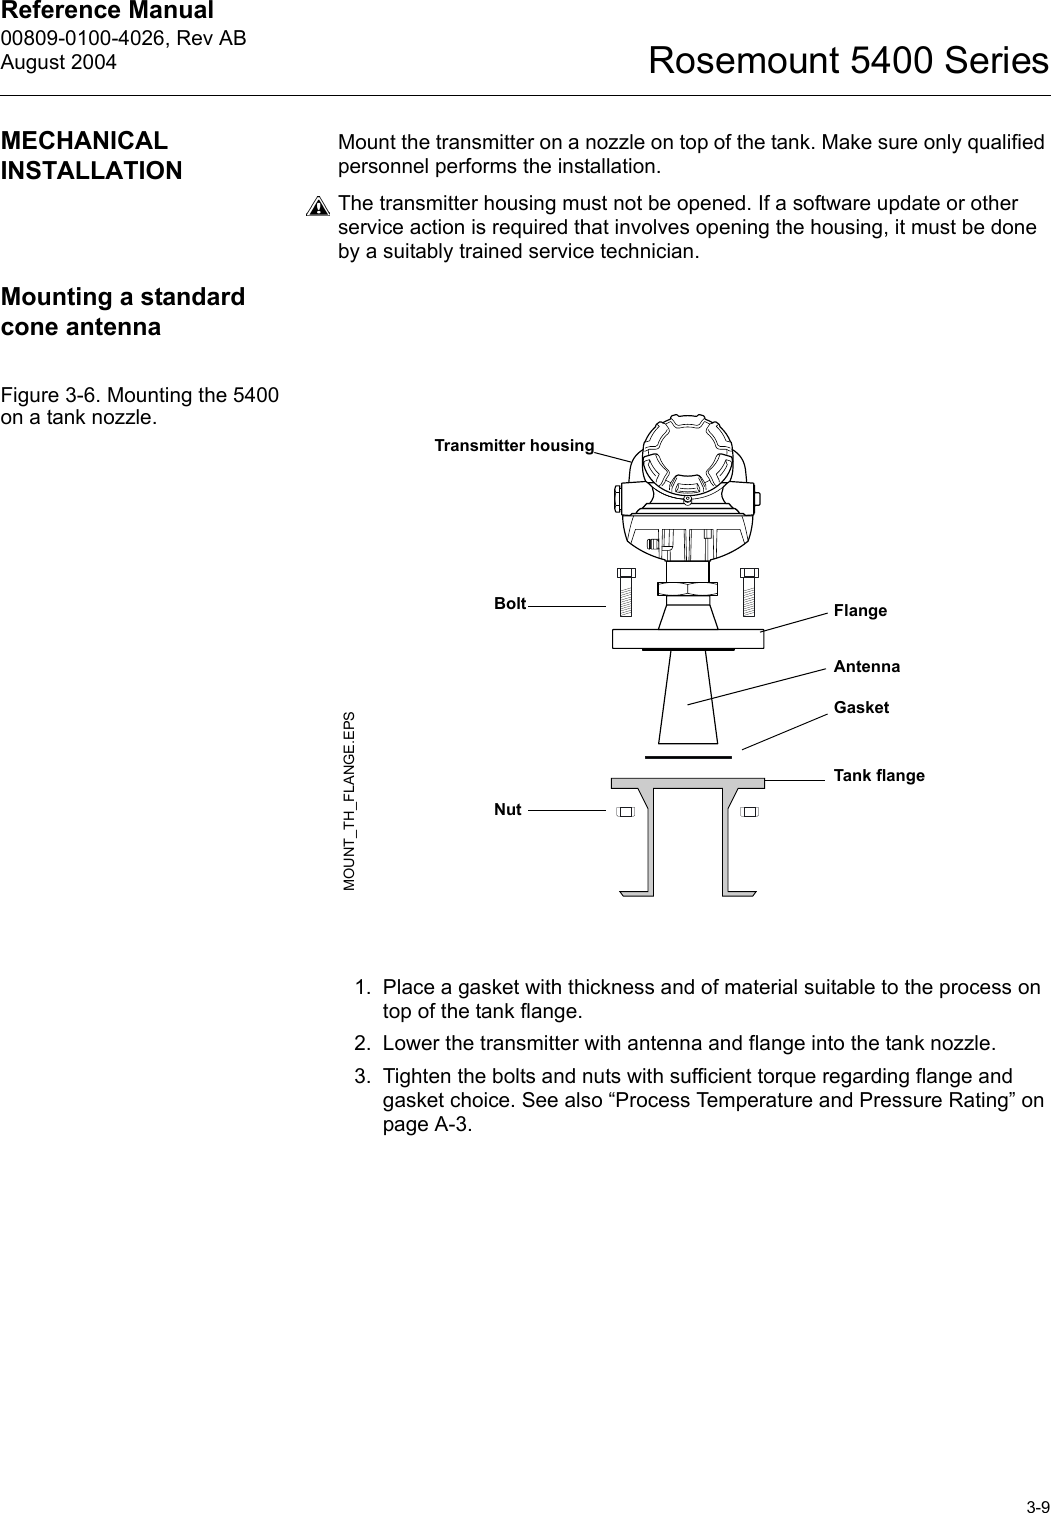 Reference Manual 00809-0100-4026, Rev ABAugust 20043-9Rosemount 5400 SeriesMECHANICAL INSTALLATIONMount the transmitter on a nozzle on top of the tank. Make sure only qualified personnel performs the installation.The transmitter housing must not be opened. If a software update or other service action is required that involves opening the housing, it must be done by a suitably trained service technician.Mounting a standard cone antennaFigure 3-6. Mounting the 5400 on a tank nozzle.1. Place a gasket with thickness and of material suitable to the process on top of the tank flange. 2. Lower the transmitter with antenna and flange into the tank nozzle.3. Tighten the bolts and nuts with sufficient torque regarding flange and gasket choice. See also “Process Temperature and Pressure Rating” on page A-3.Transmitter housingBoltGasketFlangeTank flangeAntennaMOUNT_TH_FLANGE.EPSNut